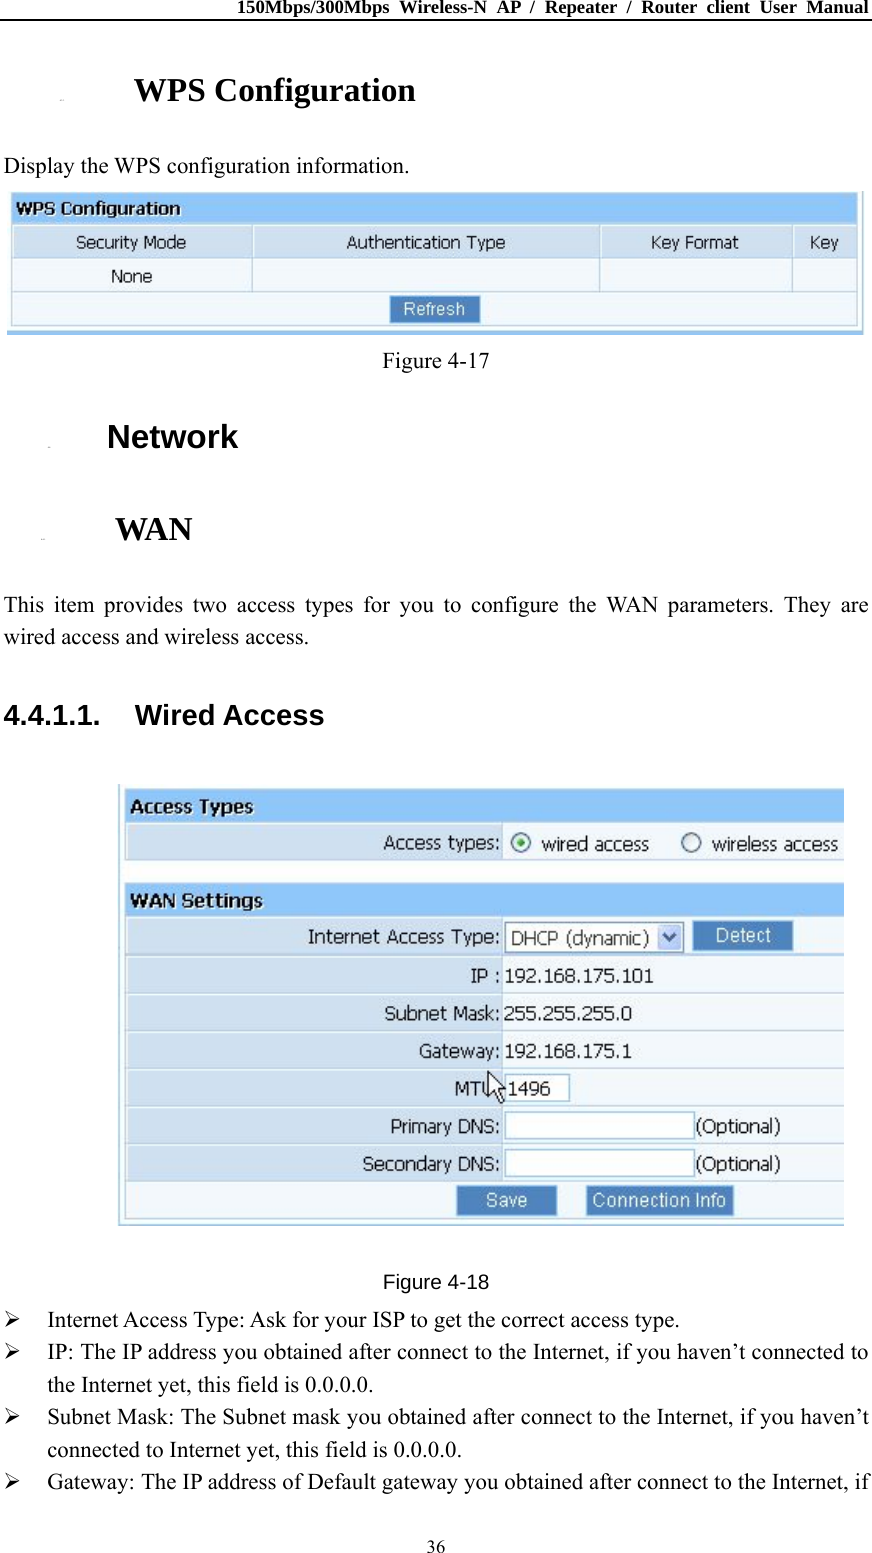 150Mbps/300Mbps Wireless-N AP / Repeater / Router client User Manual  364.3.3. WPS Configuration Display the WPS configuration information.  Figure 4-17 4.4. Network 4.4.1. WAN This item provides two access types for you to configure the WAN parameters. They are wired access and wireless access. 4.4.1.1. Wired Access  Figure 4-18  Internet Access Type: Ask for your ISP to get the correct access type.  IP: The IP address you obtained after connect to the Internet, if you haven’t connected to the Internet yet, this field is 0.0.0.0.  Subnet Mask: The Subnet mask you obtained after connect to the Internet, if you haven’t connected to Internet yet, this field is 0.0.0.0.  Gateway: The IP address of Default gateway you obtained after connect to the Internet, if 